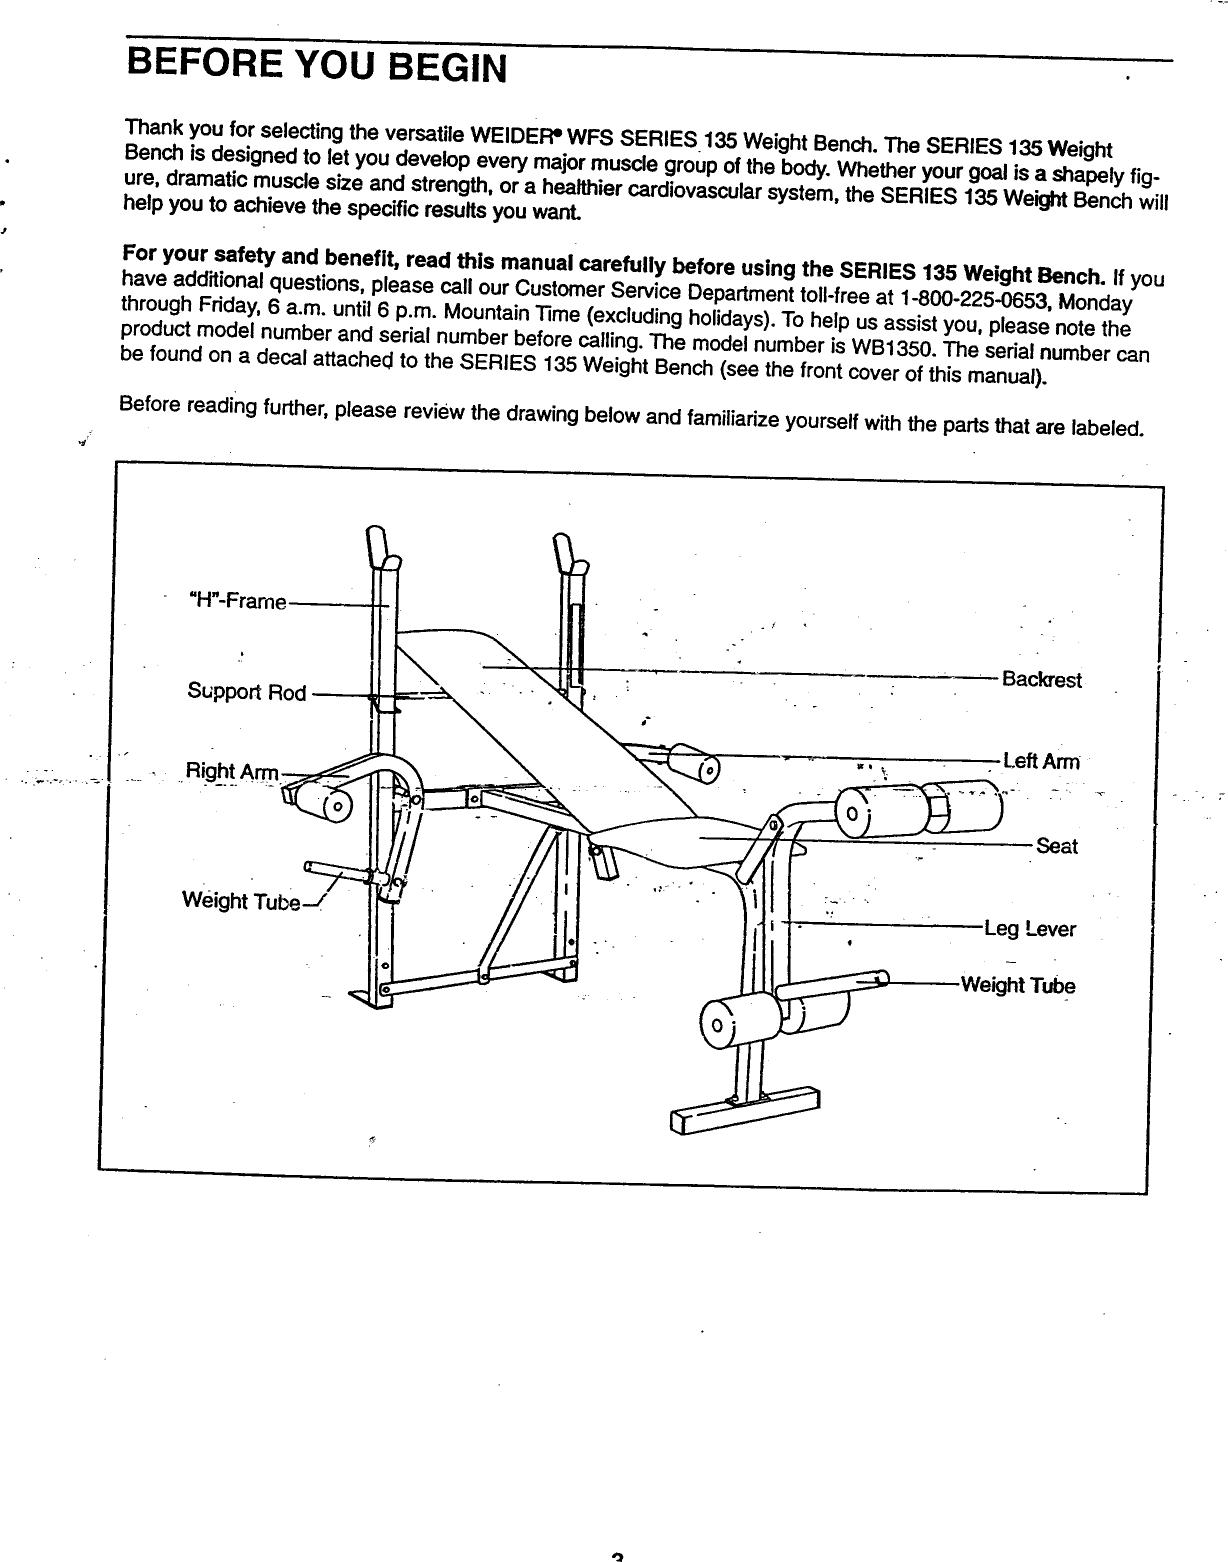 Weider Wb1350 Owner S Manual